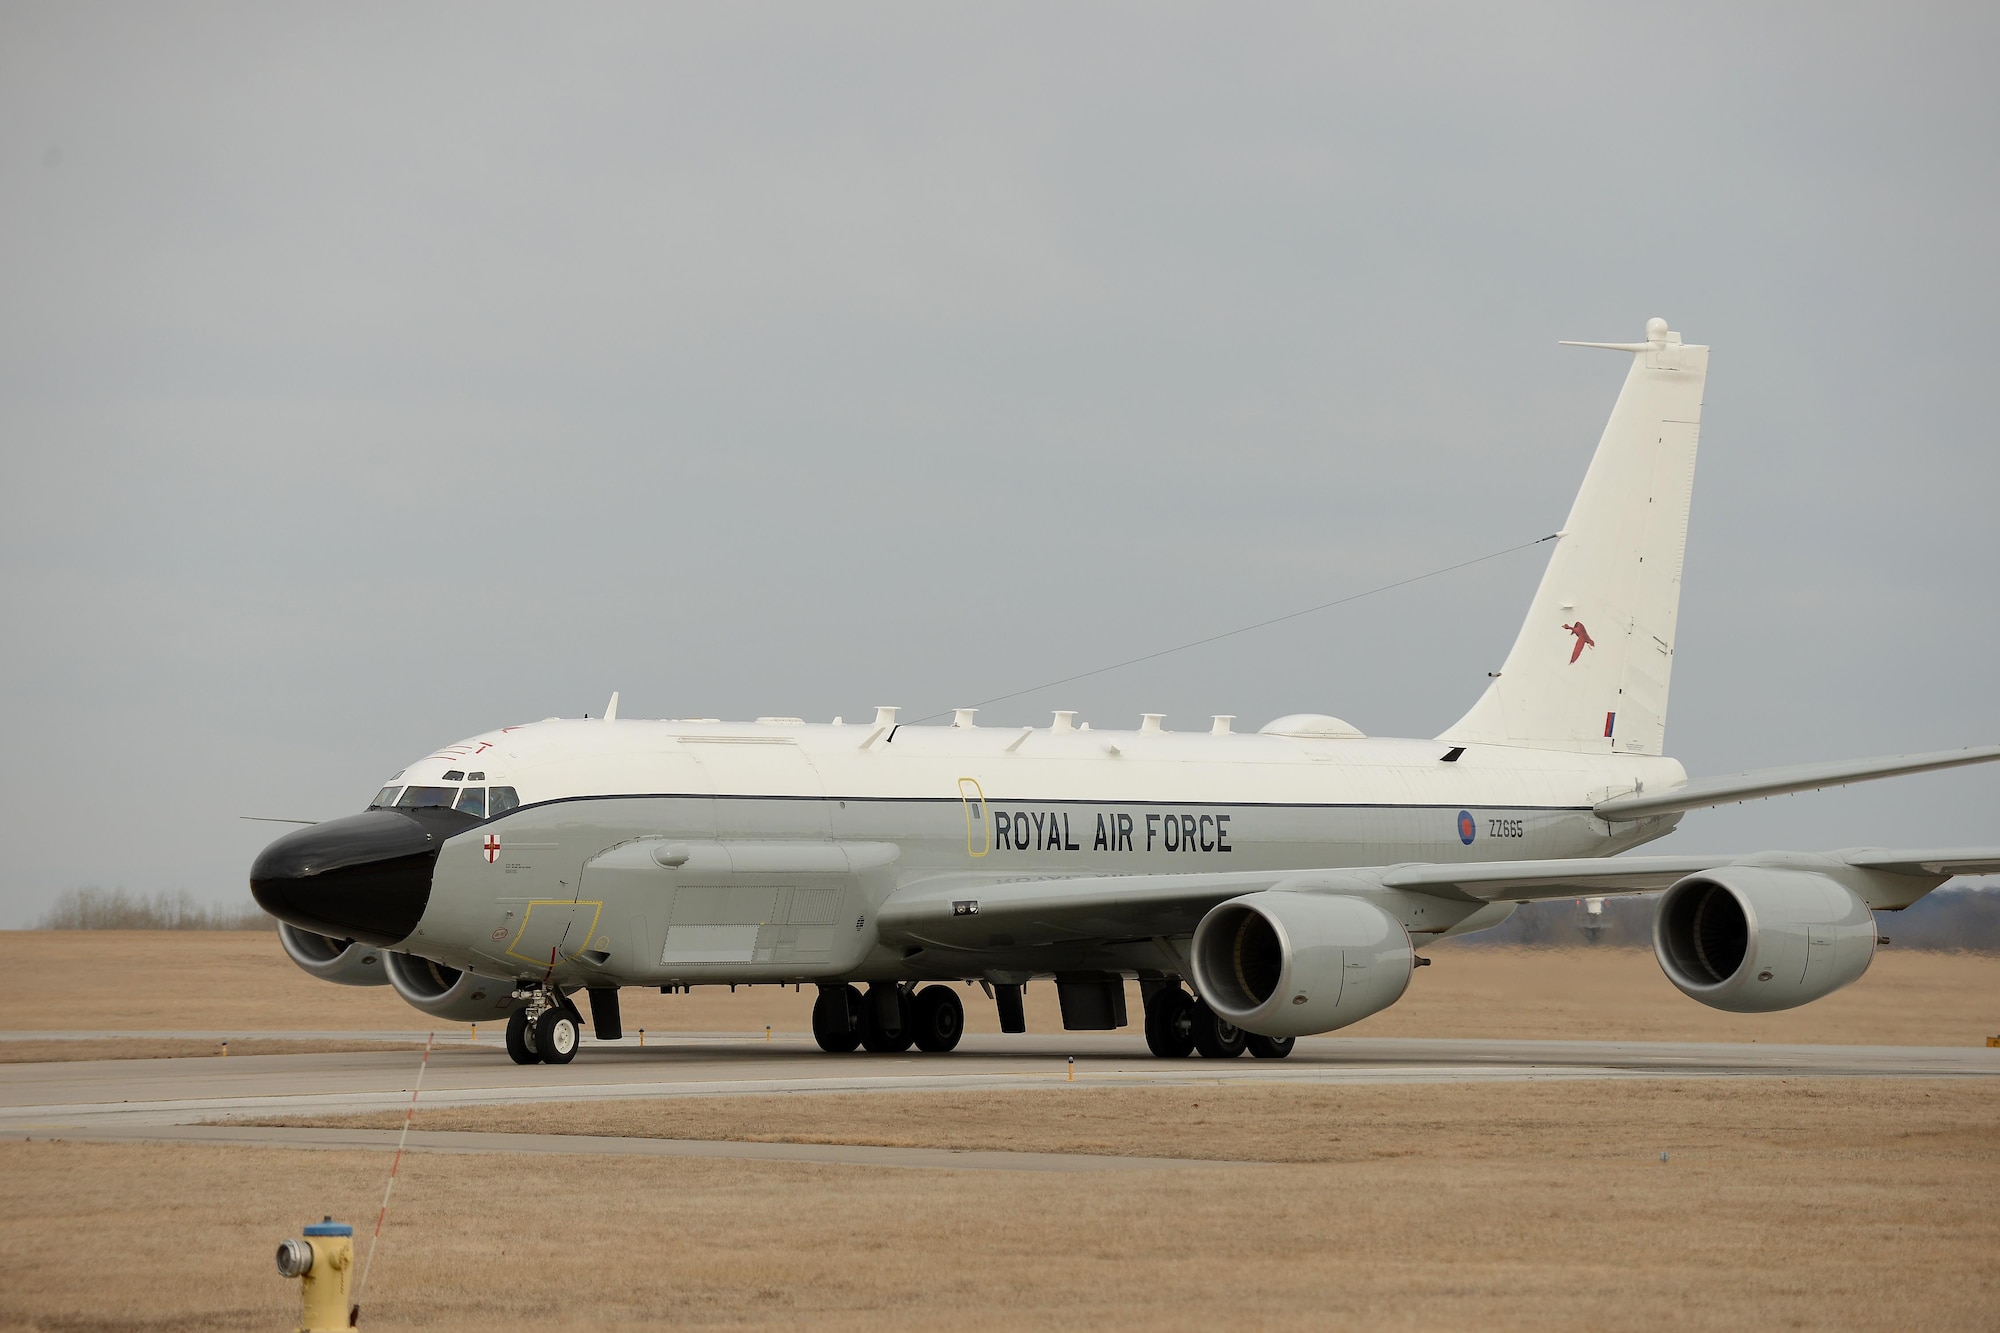 A Royal Air Force RC-135 Airseeker taxis down a taxiway at Offutt Air Force Base, Neb. Feb. 11. The aircraft diverted from Nellis Air Force Base to Offutt where it received maintenance assistance from the 55th Maintenance Group to correct a landing gear problem that occurred while participating in a joint exercise. (U.S. Air Force photo by Delanie Stafford)